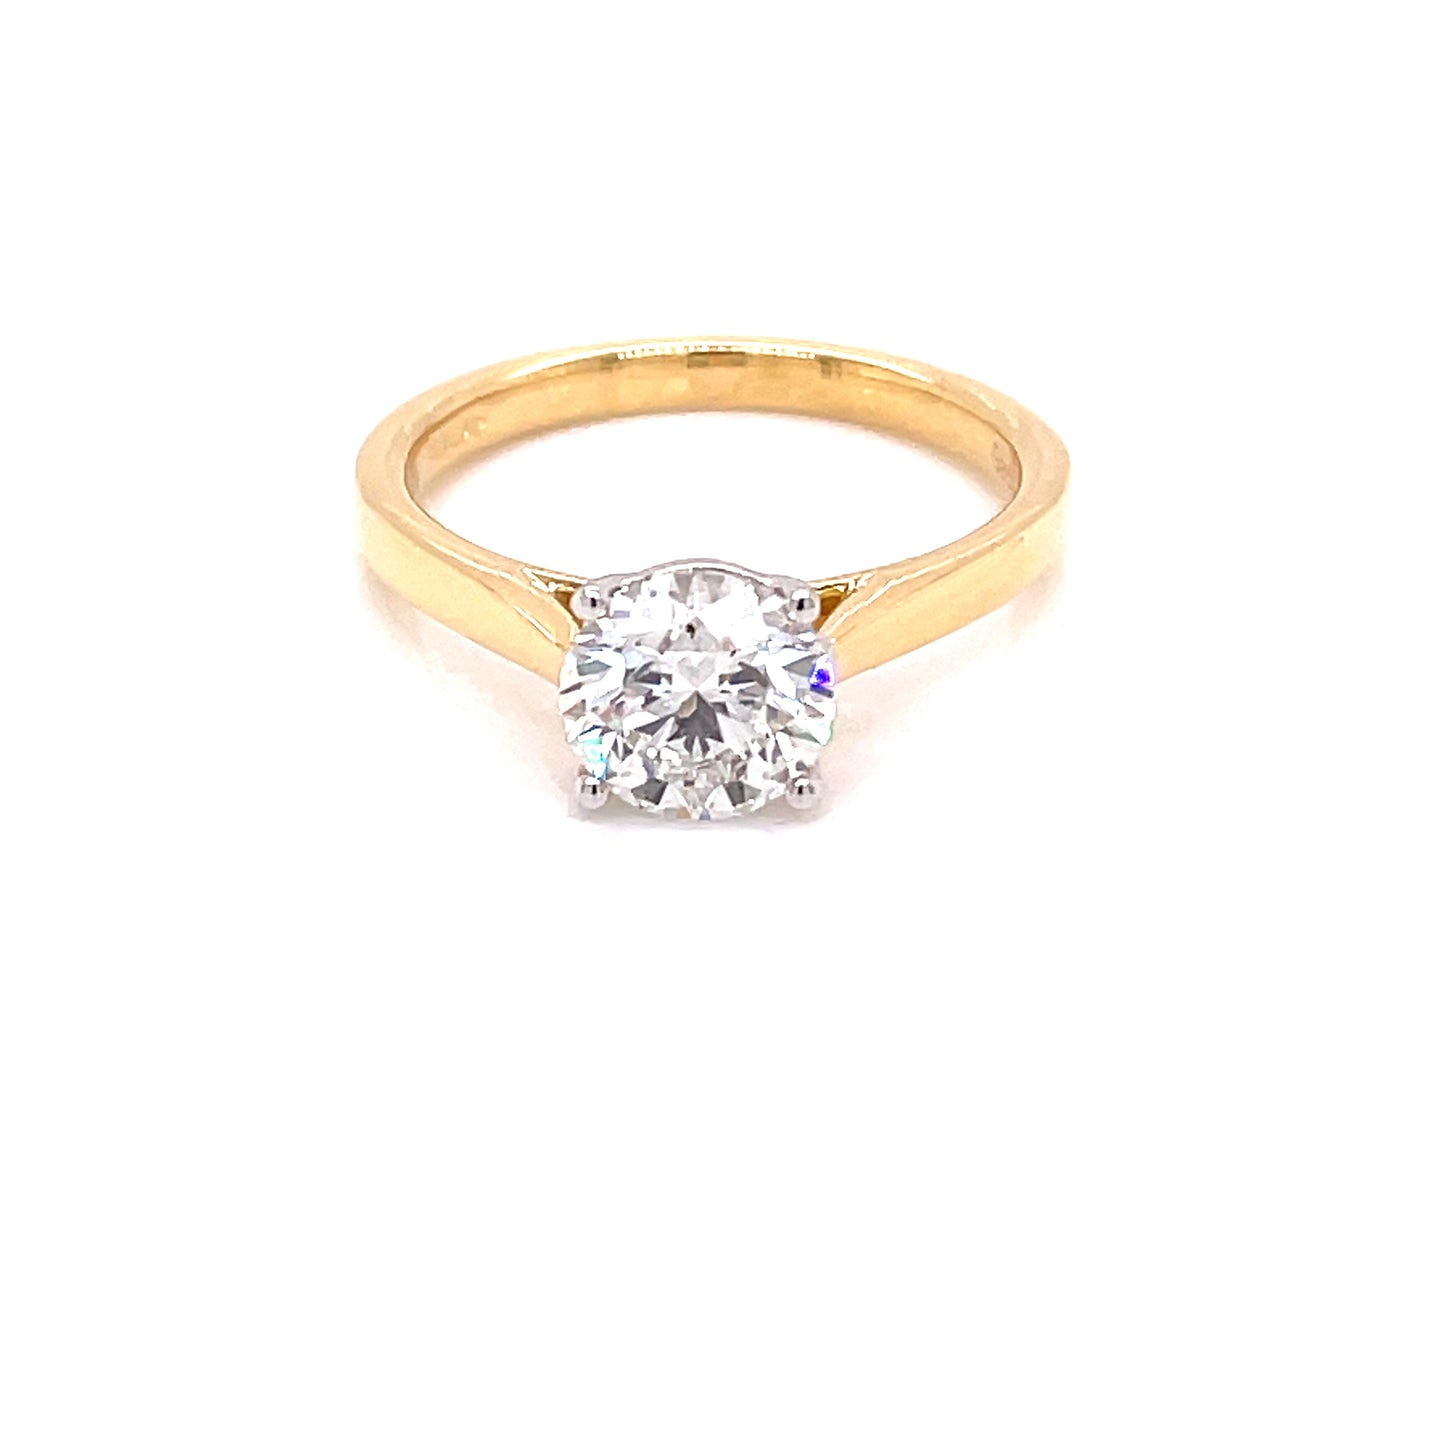 Round Brilliant Cut Diamond Solitaire Ring - 1.20cts  Gardiner Brothers   